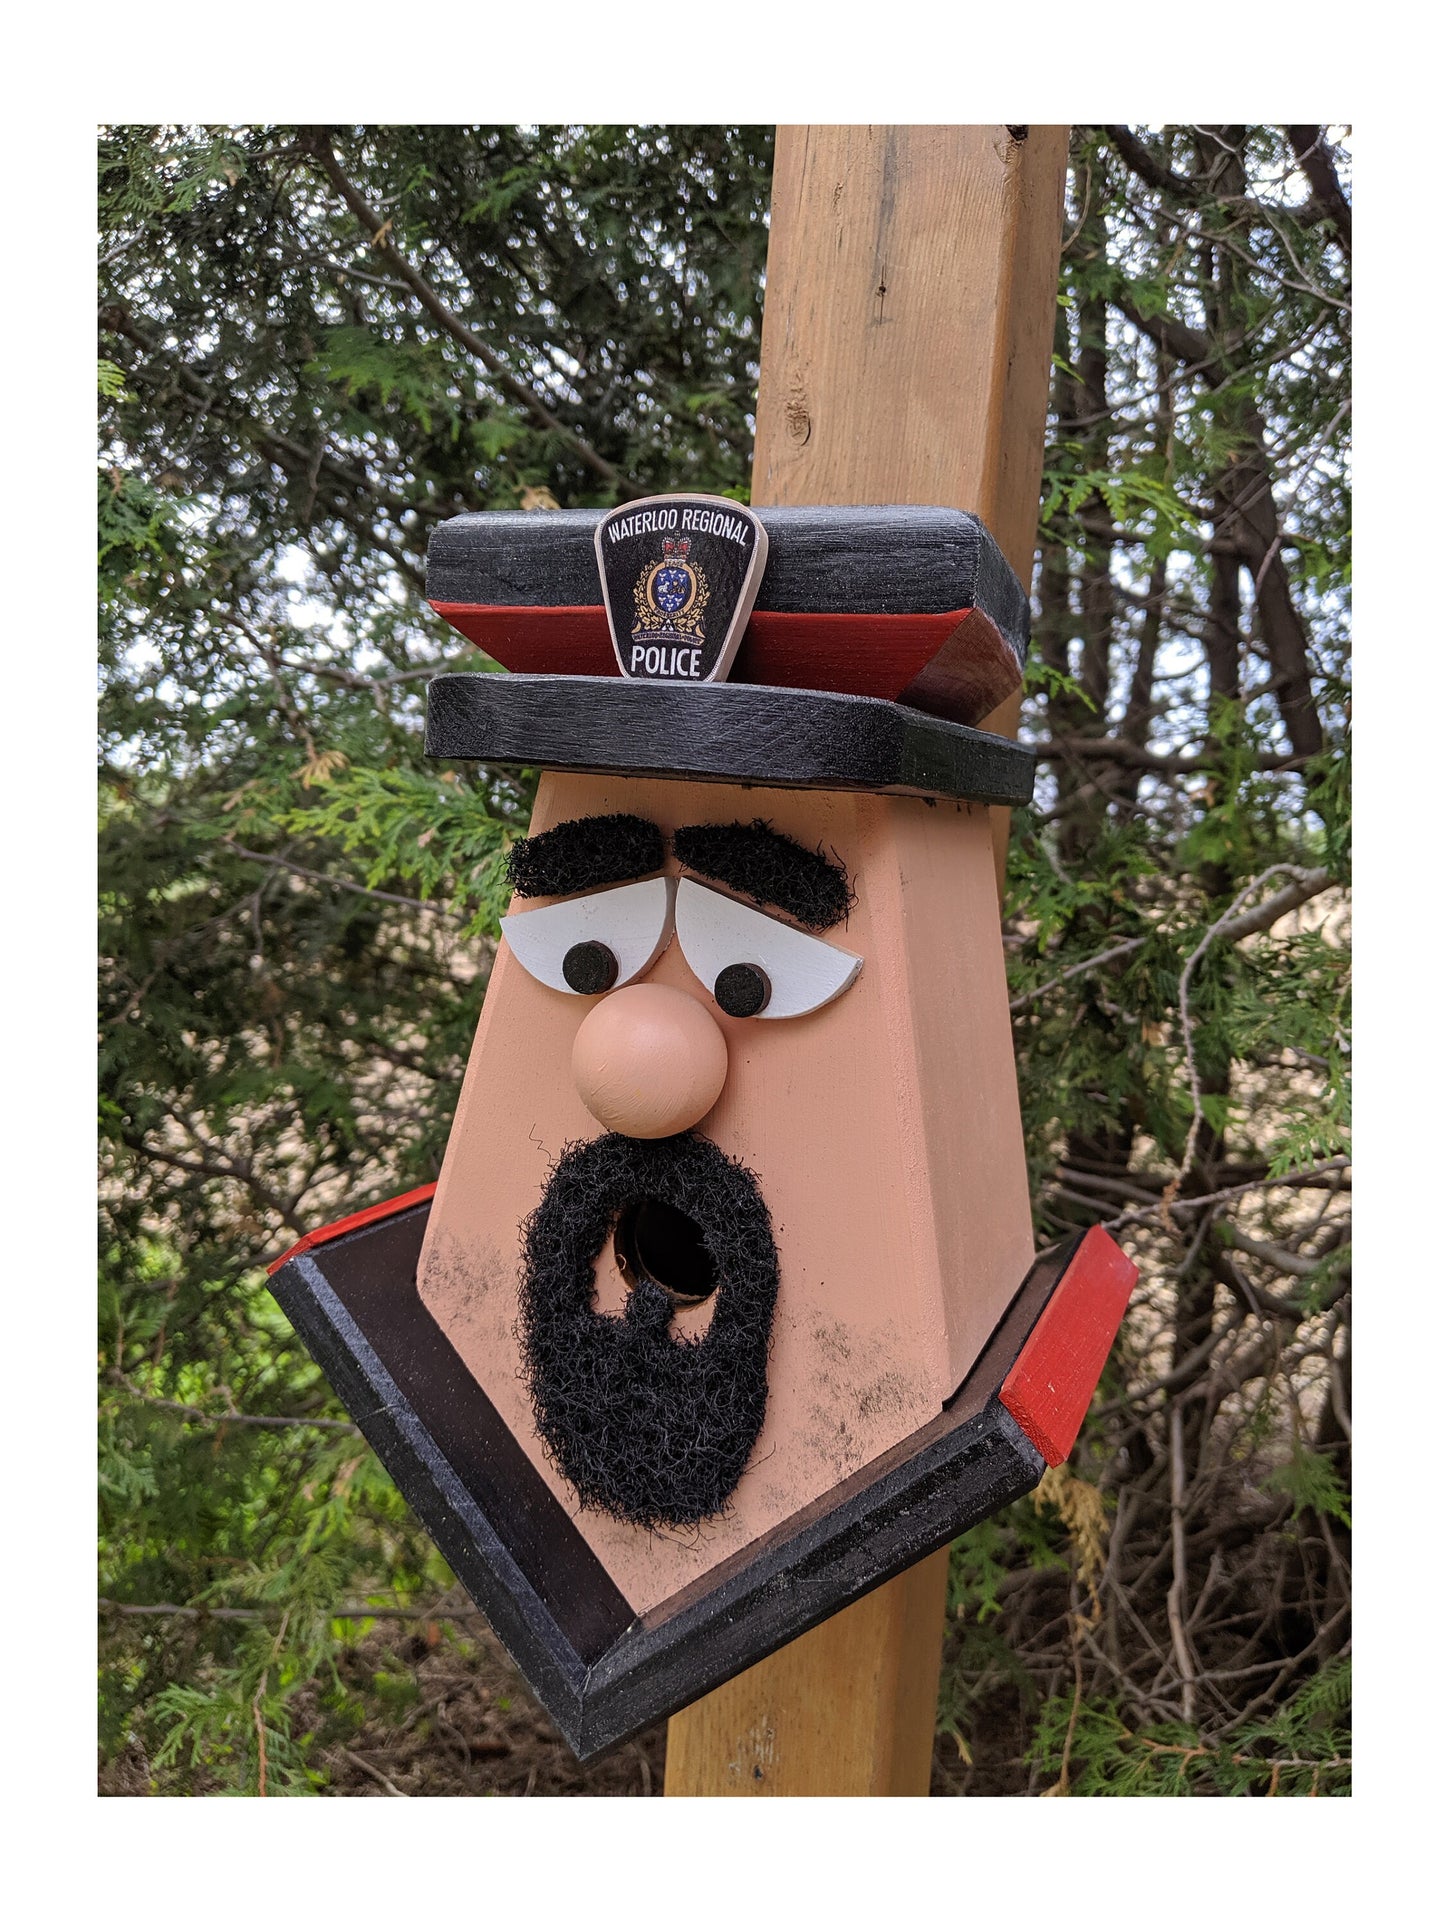 Personalized Police with Goatee Birdhouse